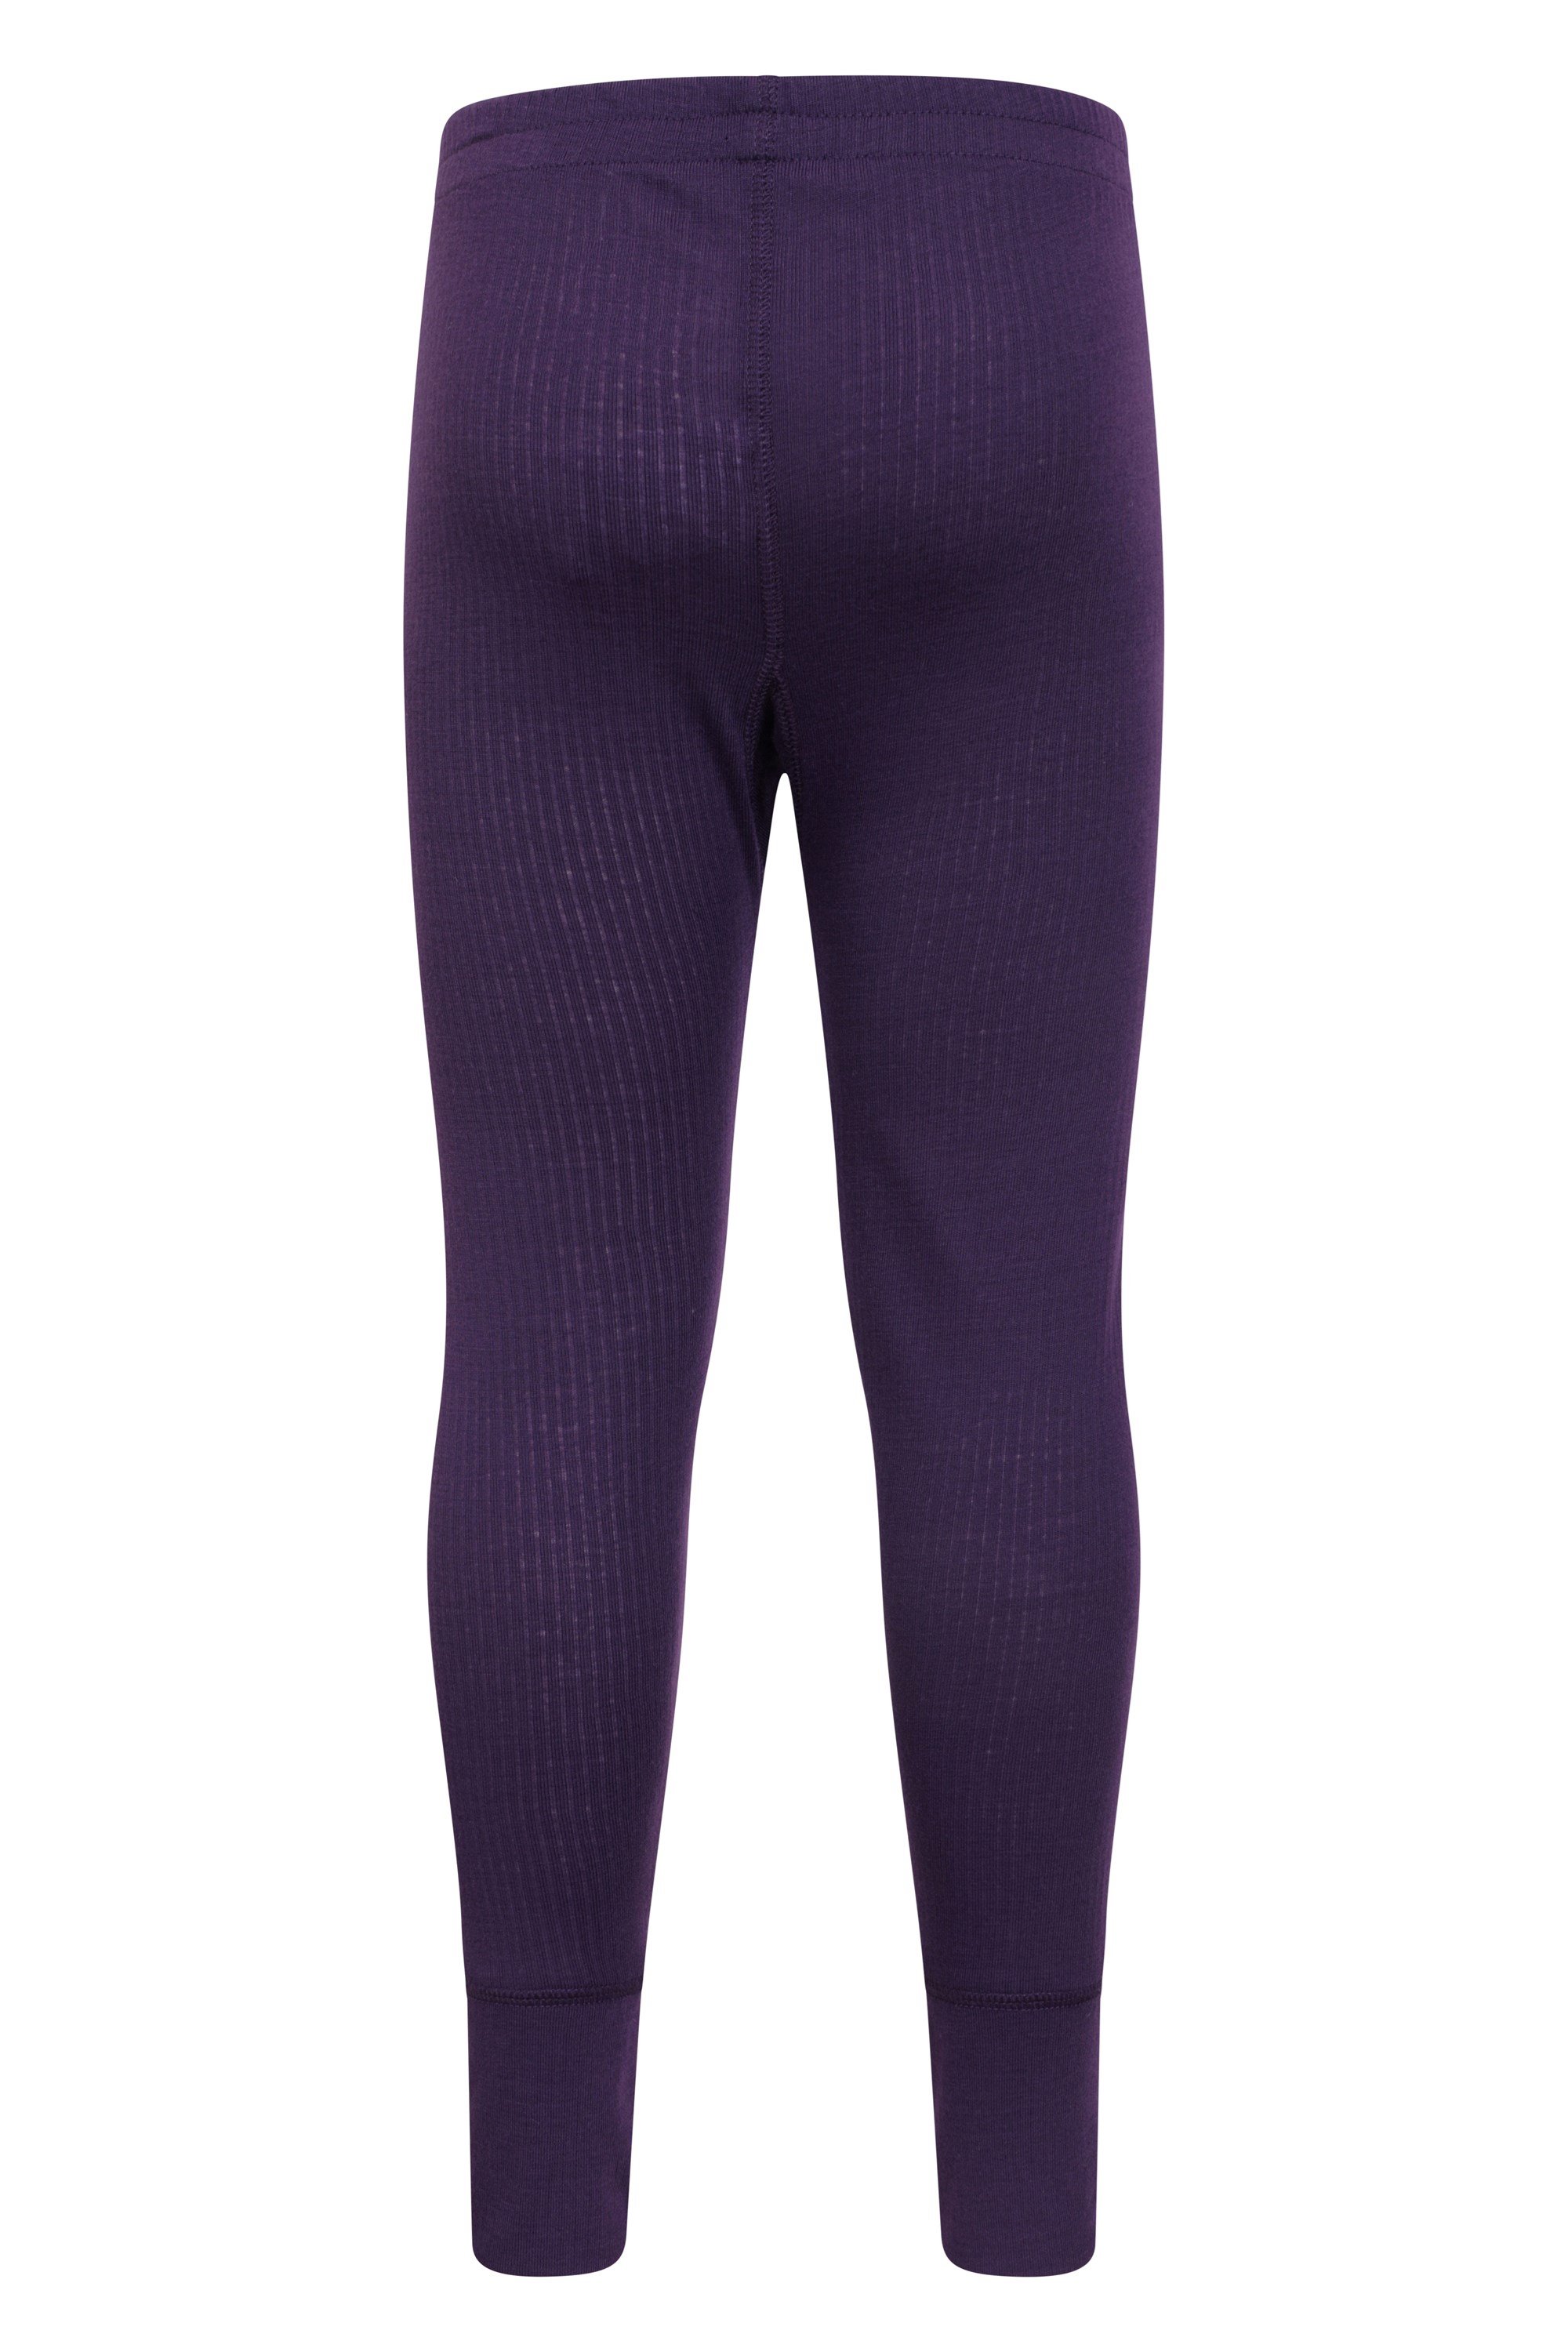 Buy Mountain Warehouse Grey Active Seamless Thermal Top & Pants Set - Kids  from Next Luxembourg